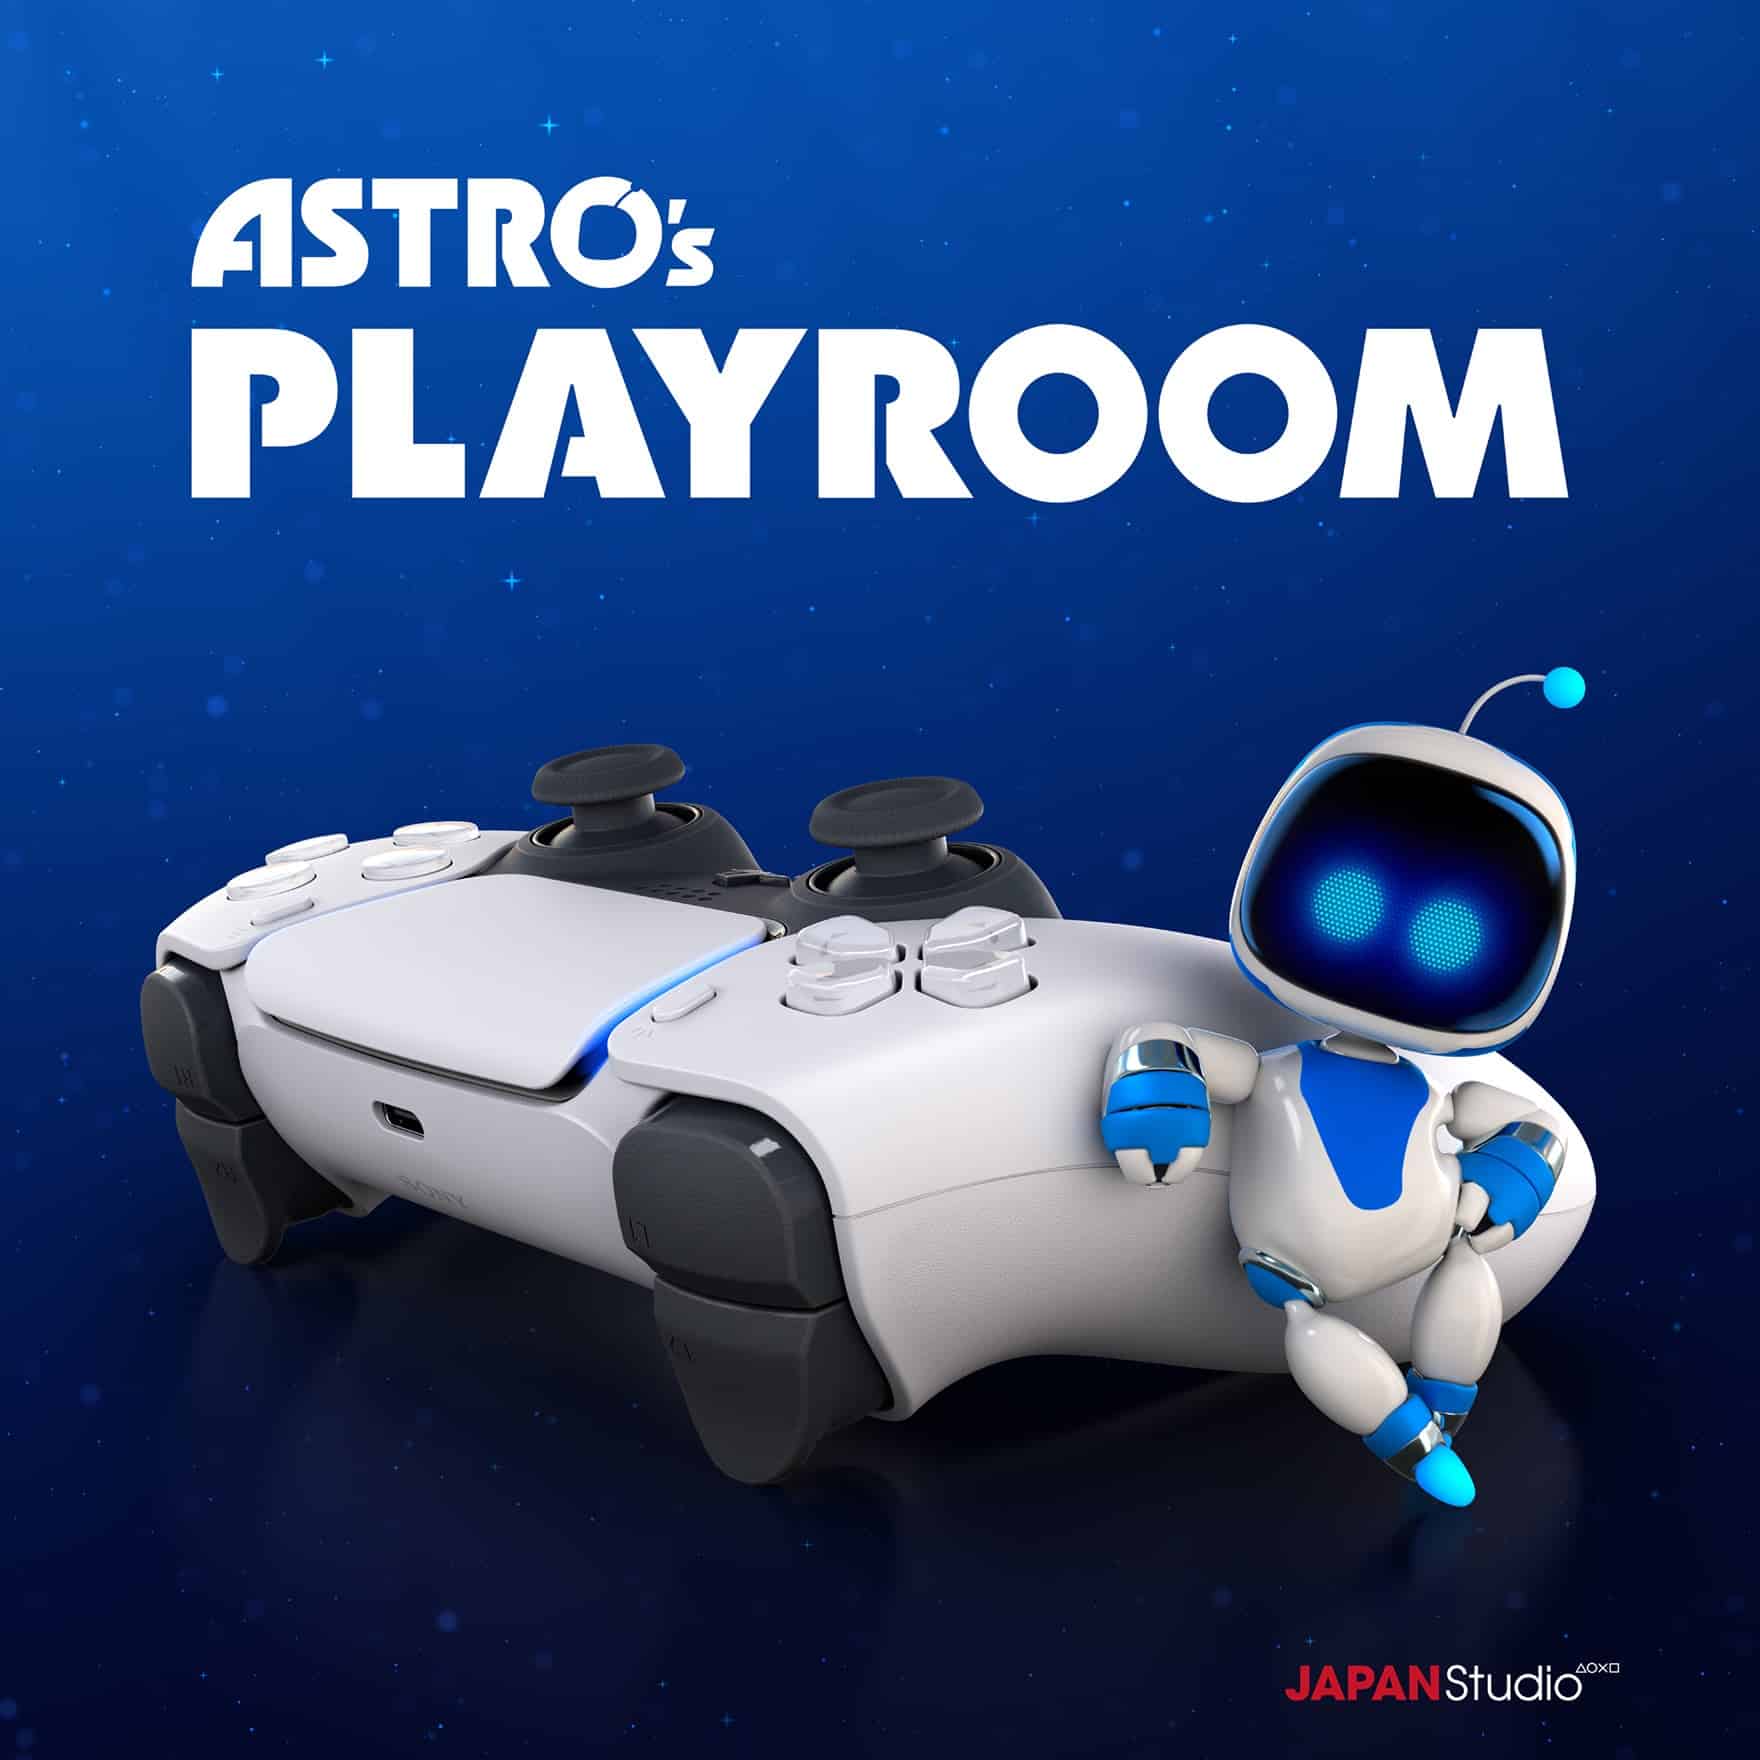 Astro’s Playroom player count stats